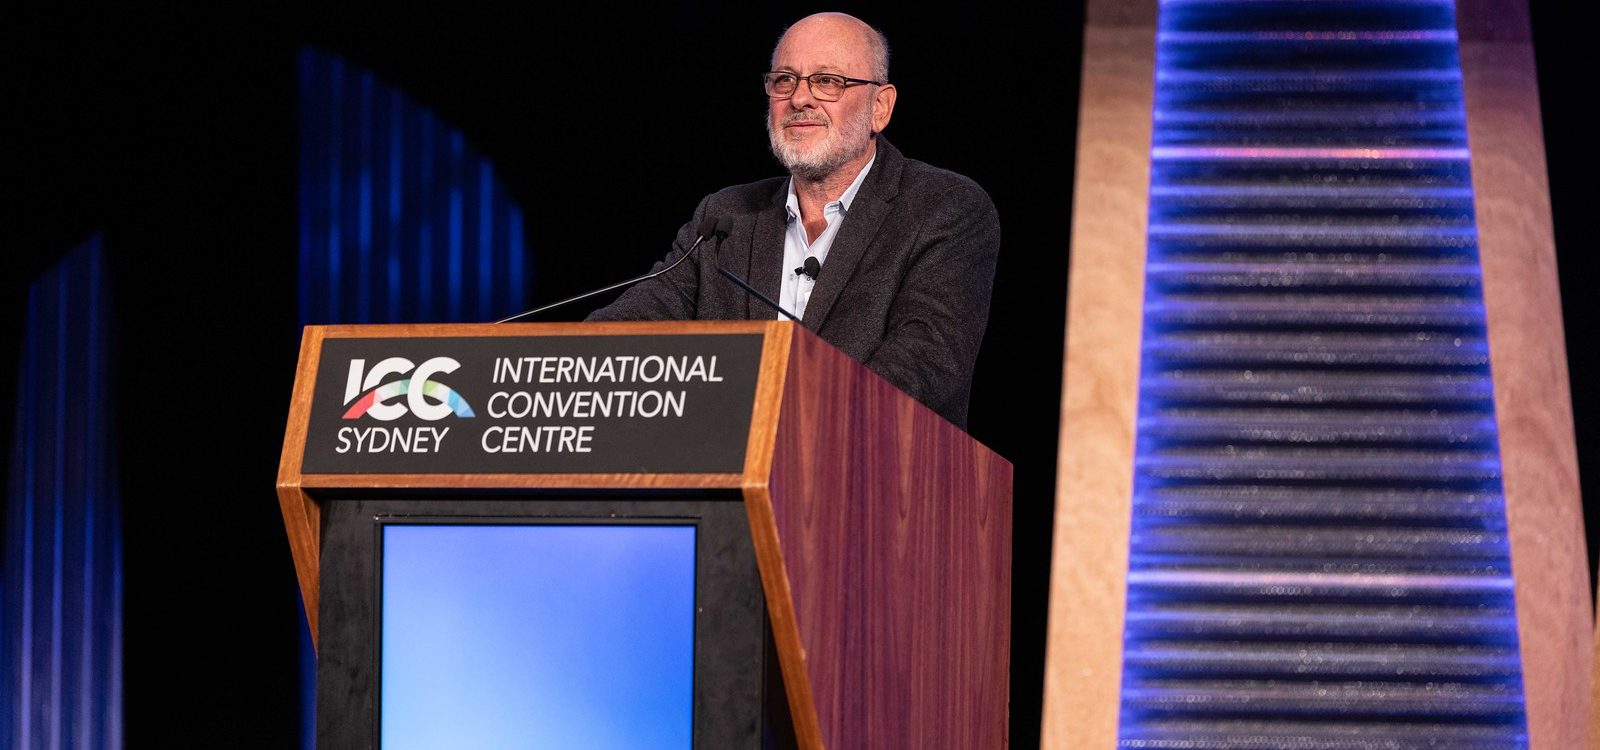 Tim Flannery: No counsel of despair